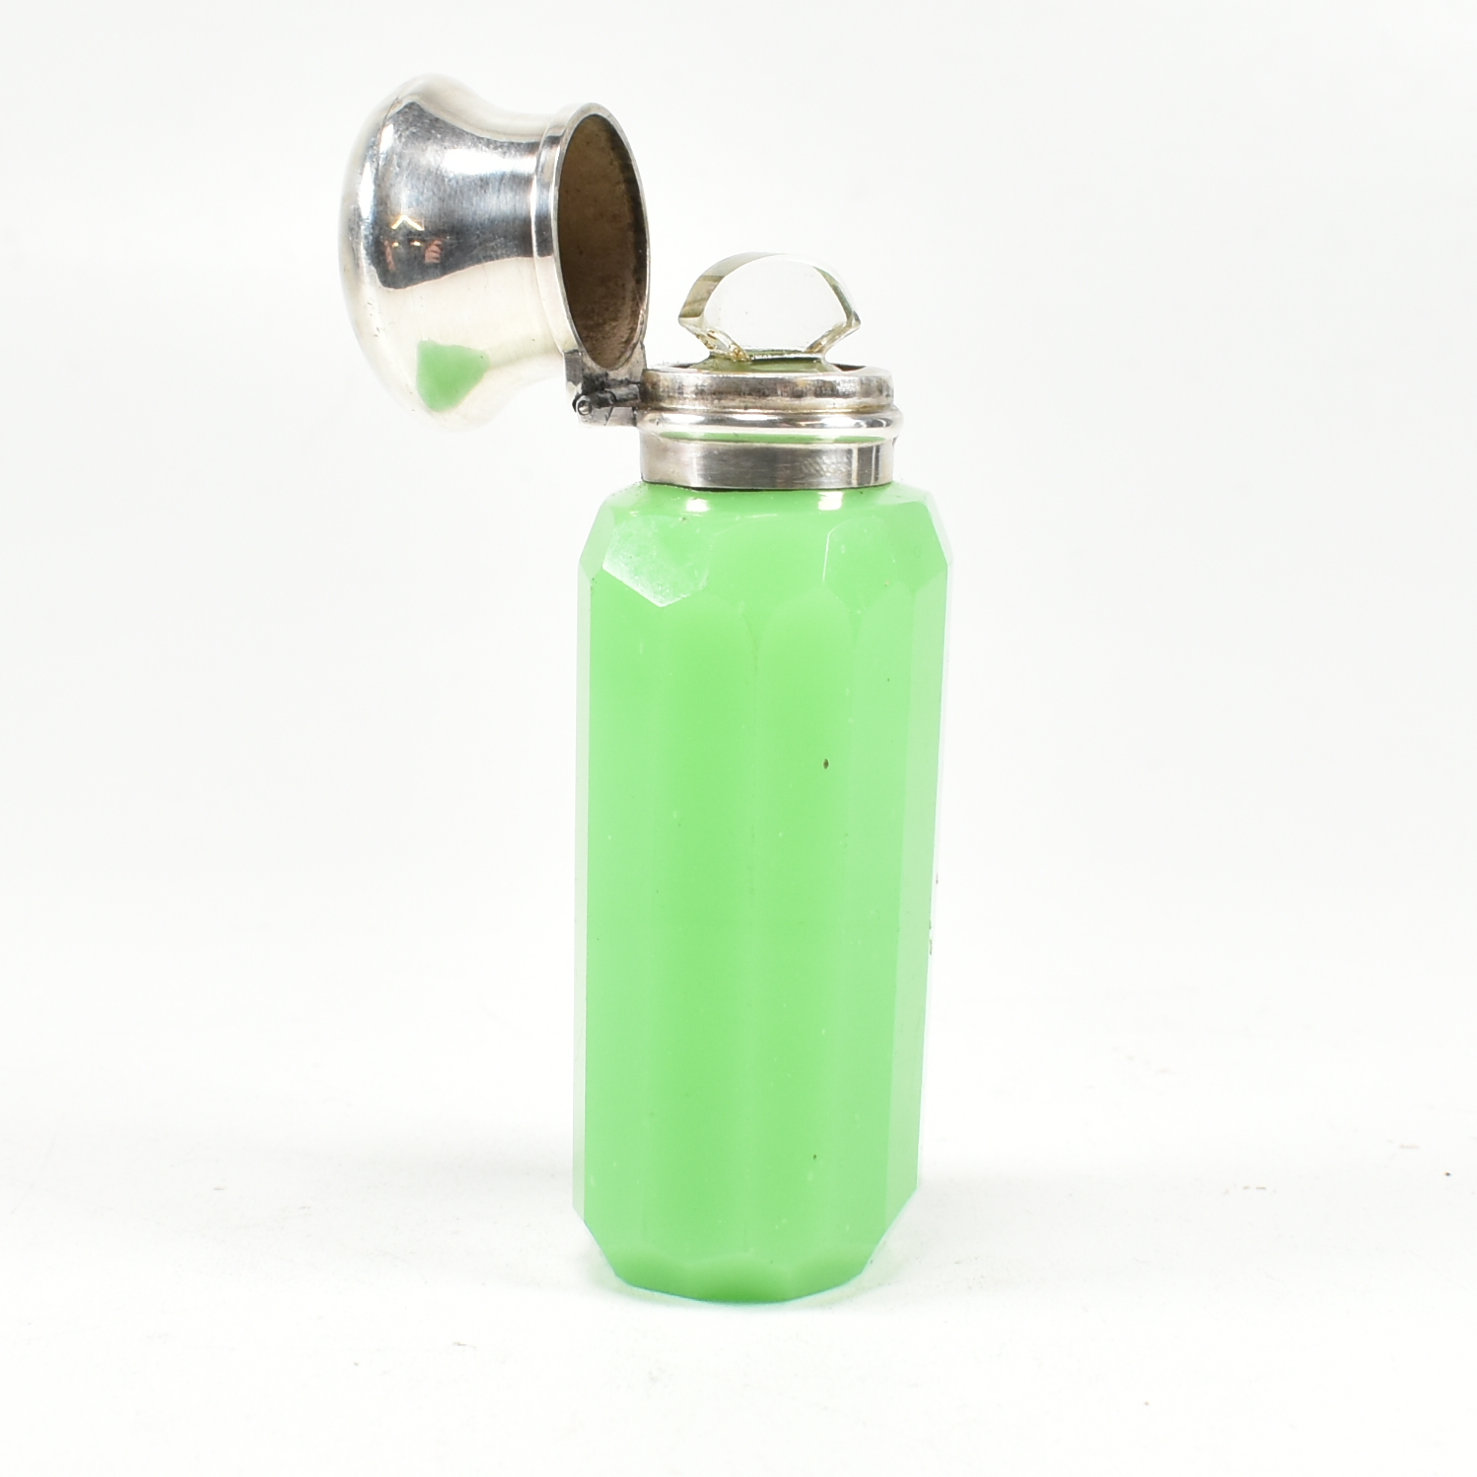 EARLY 20TH CENTURY WHITE METAL & URANIUM GLASS SCENT BOTTLE - Image 5 of 9